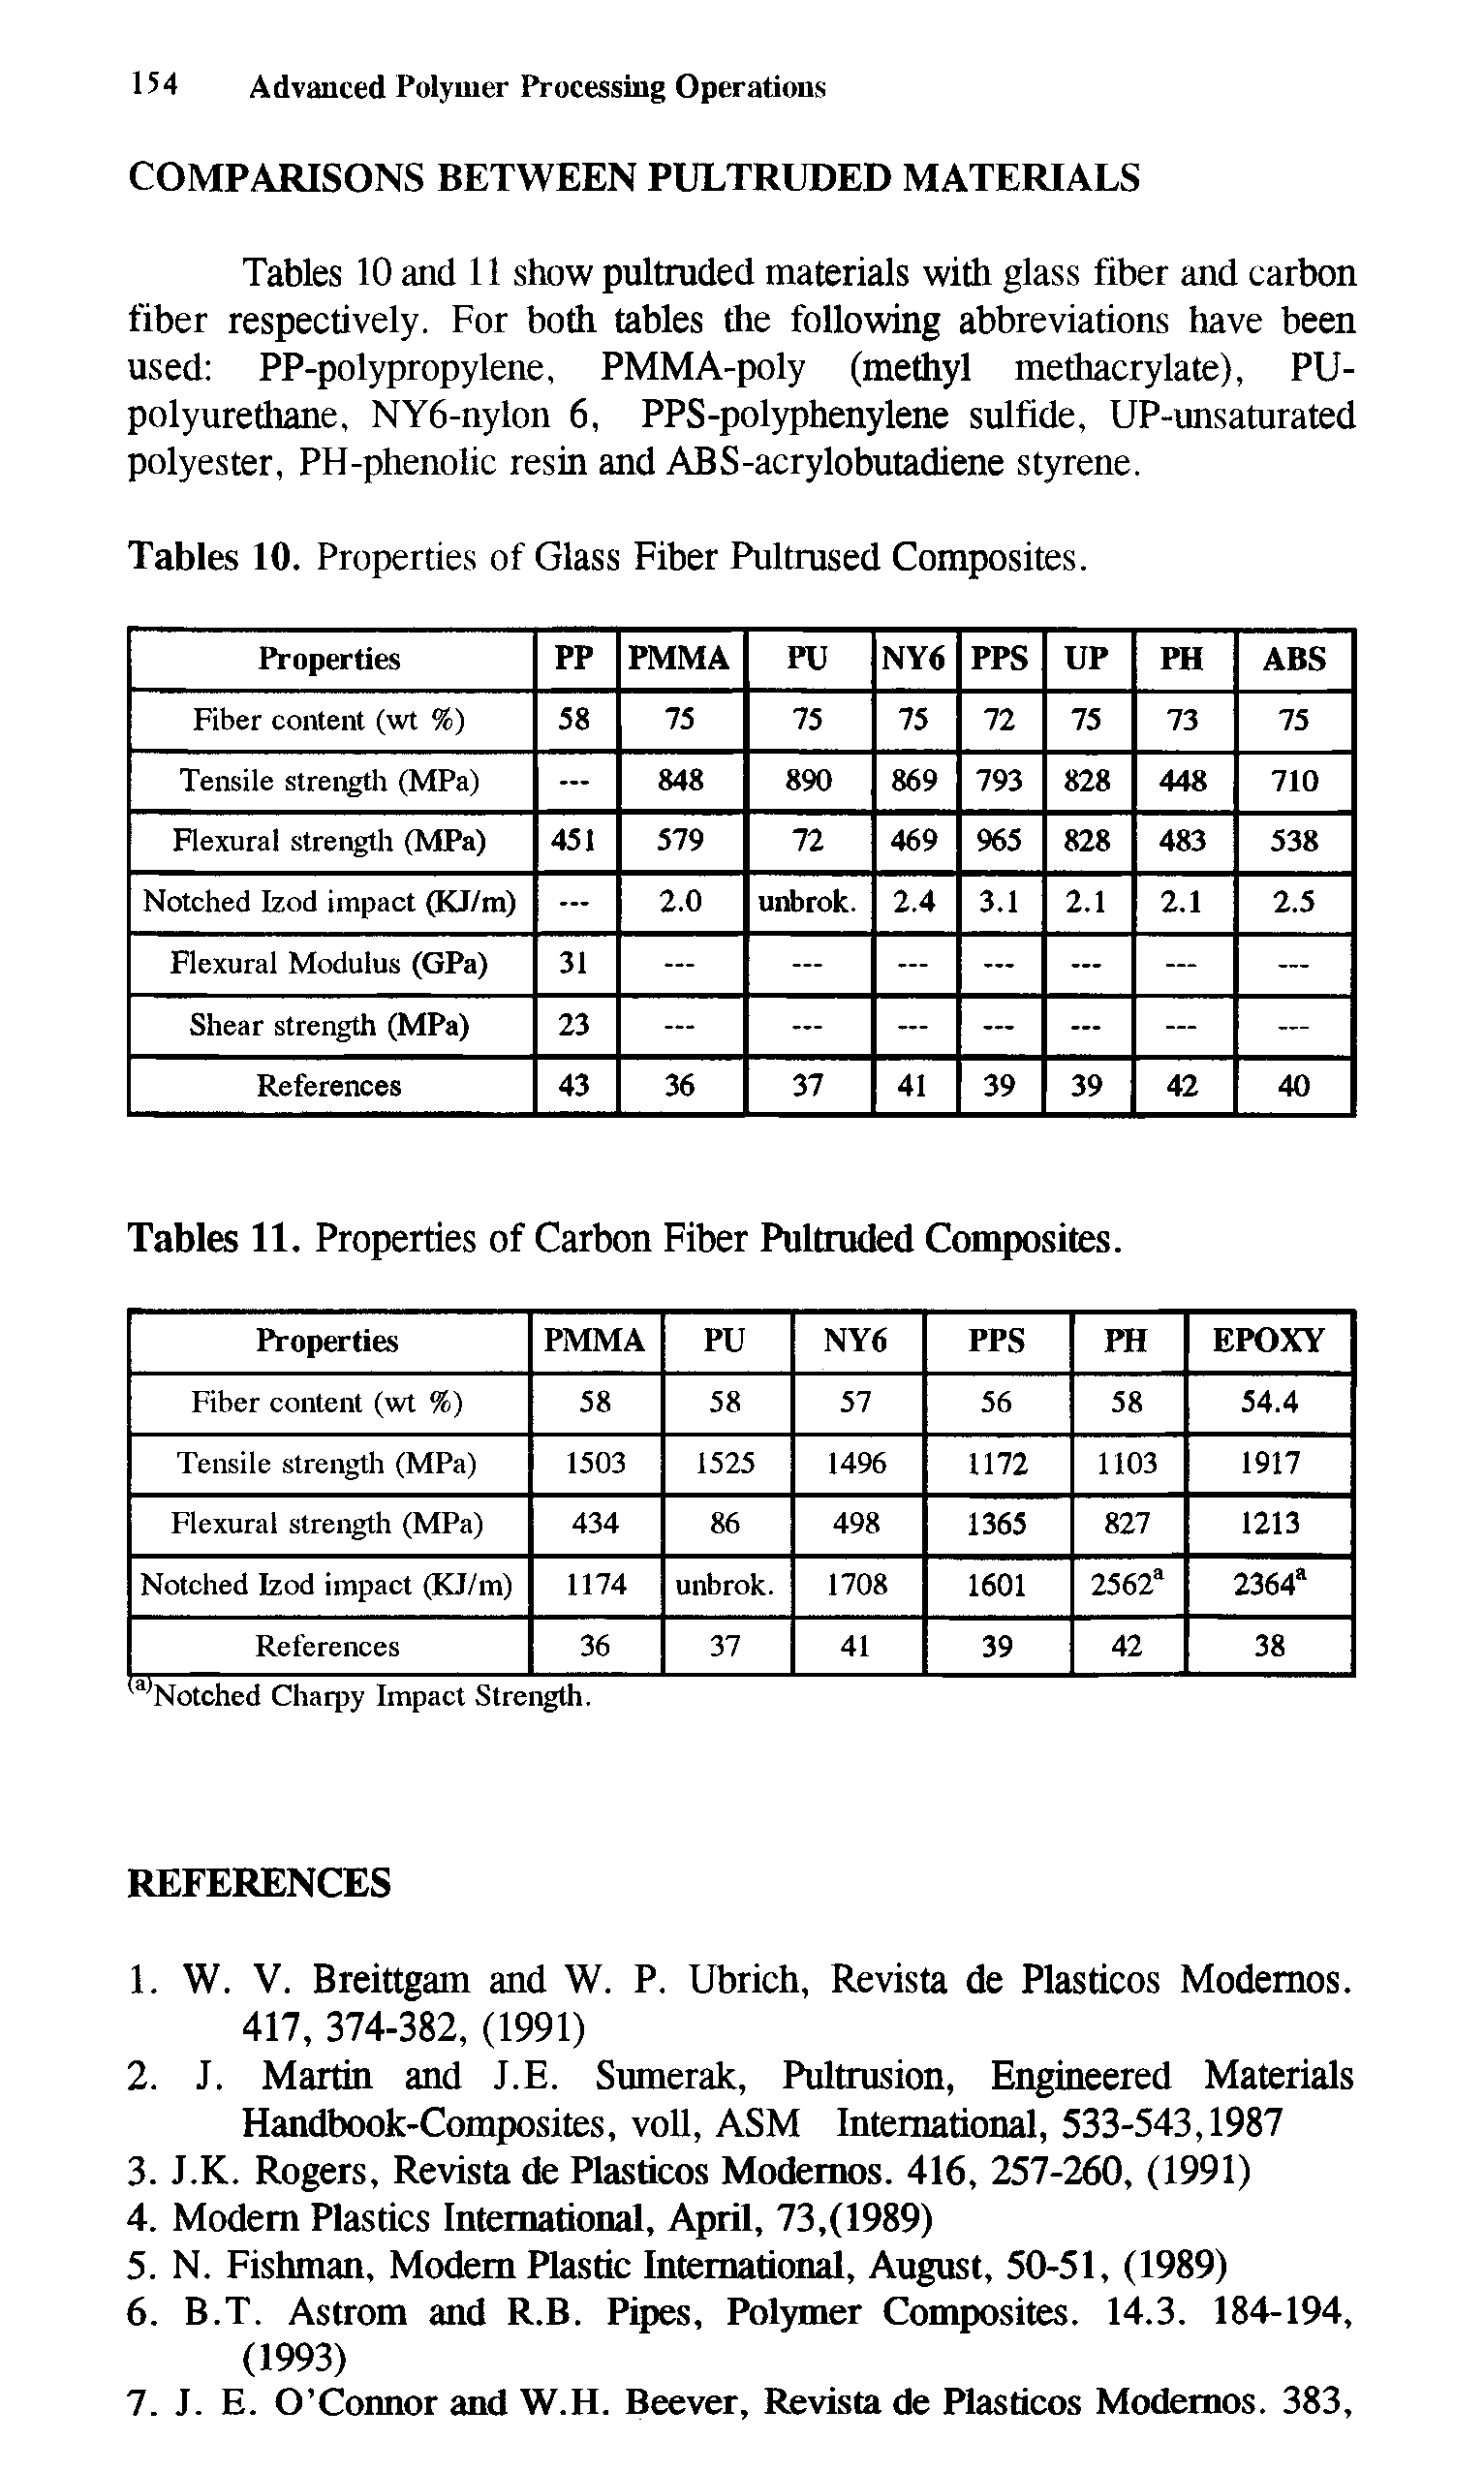 Tables 10 and 11 show pultruded materials with glass fiber and carbon fiber respectively. For both tables the following abbreviations have been used PP-polypropylene, PMMA-poly (methyl methacrylate), PU-polyurediane, NY6-nylon 6, PPS-polyphenylene sulfide, UP-unsaturated polyester, PH-phenolic resin and ABS-acrylobutadiene styrene.